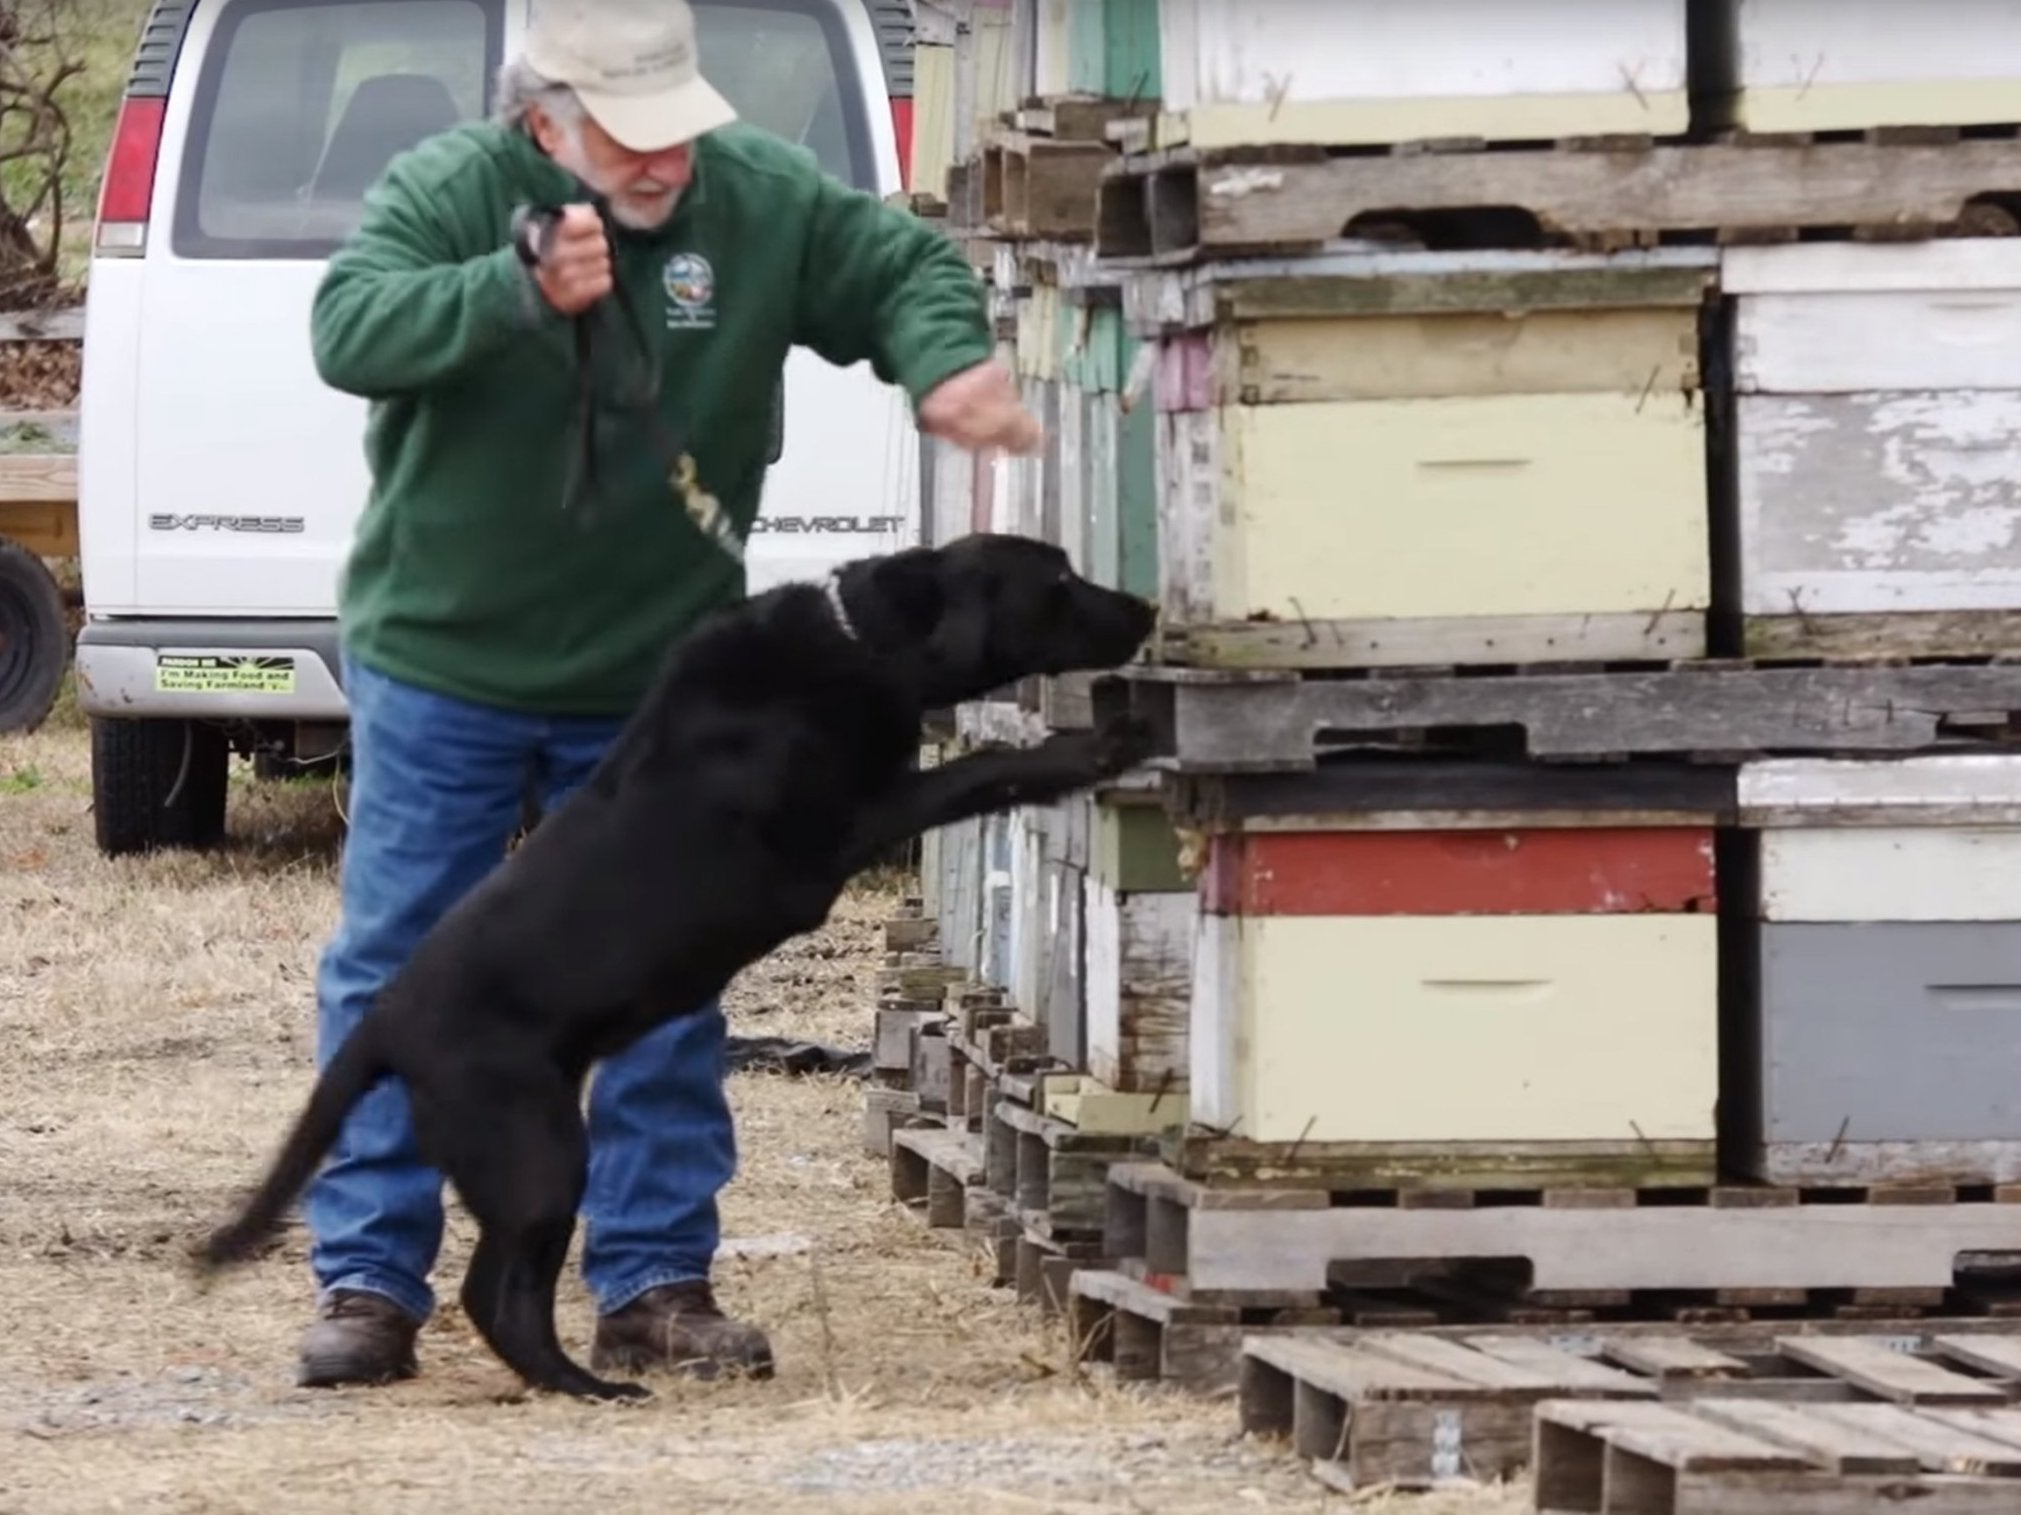 &#13;
The dogs are trained to sniff at the comb and detect if the bacteria has killed of larvae &#13;